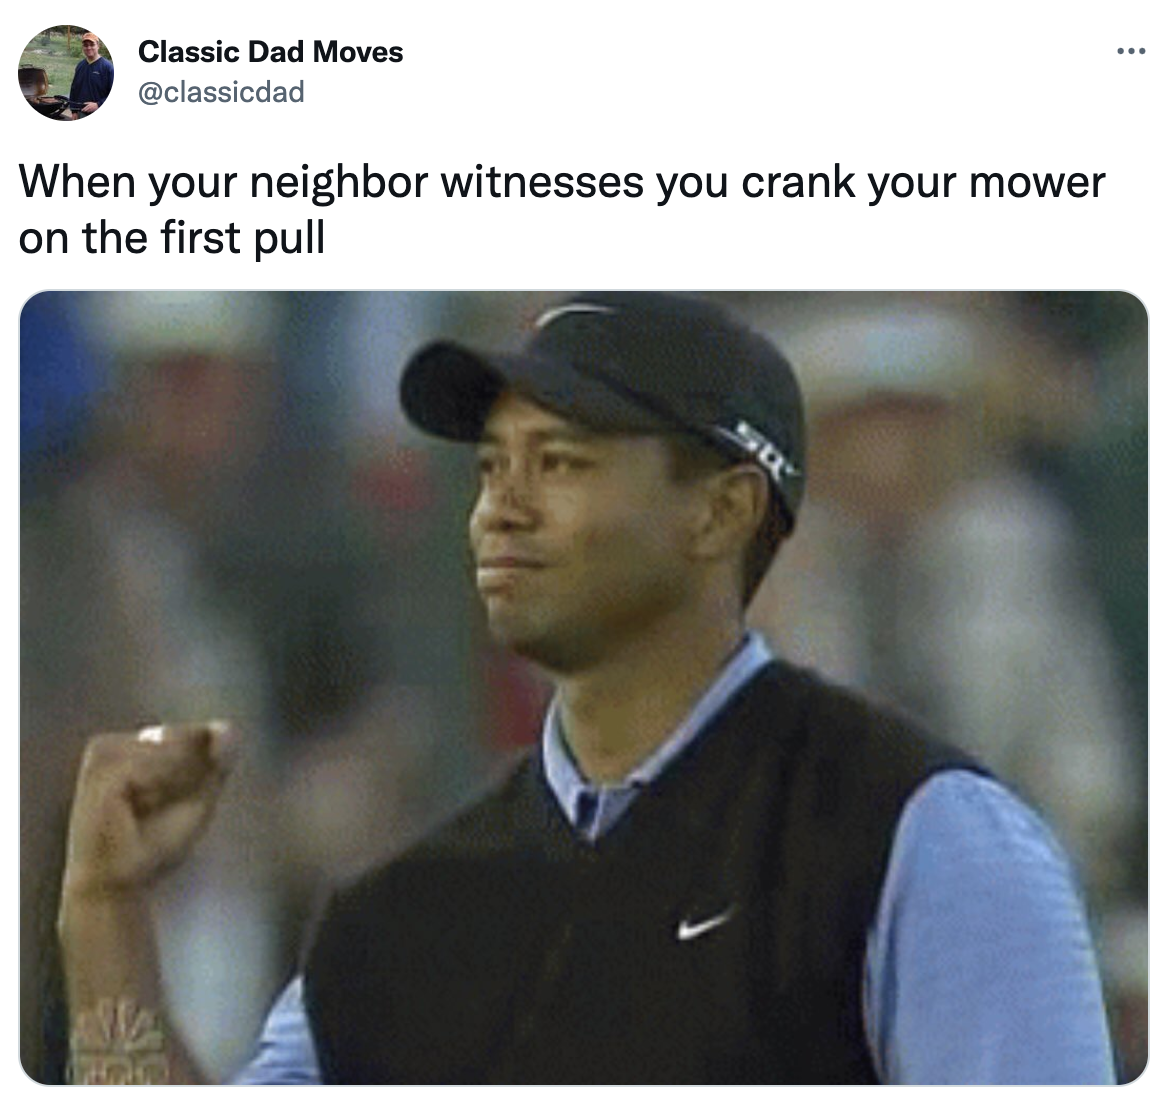 Dank Dad Memes - photo caption - Classic Dad Moves When your neighbor witnesses you crank your mower on the first pull Su